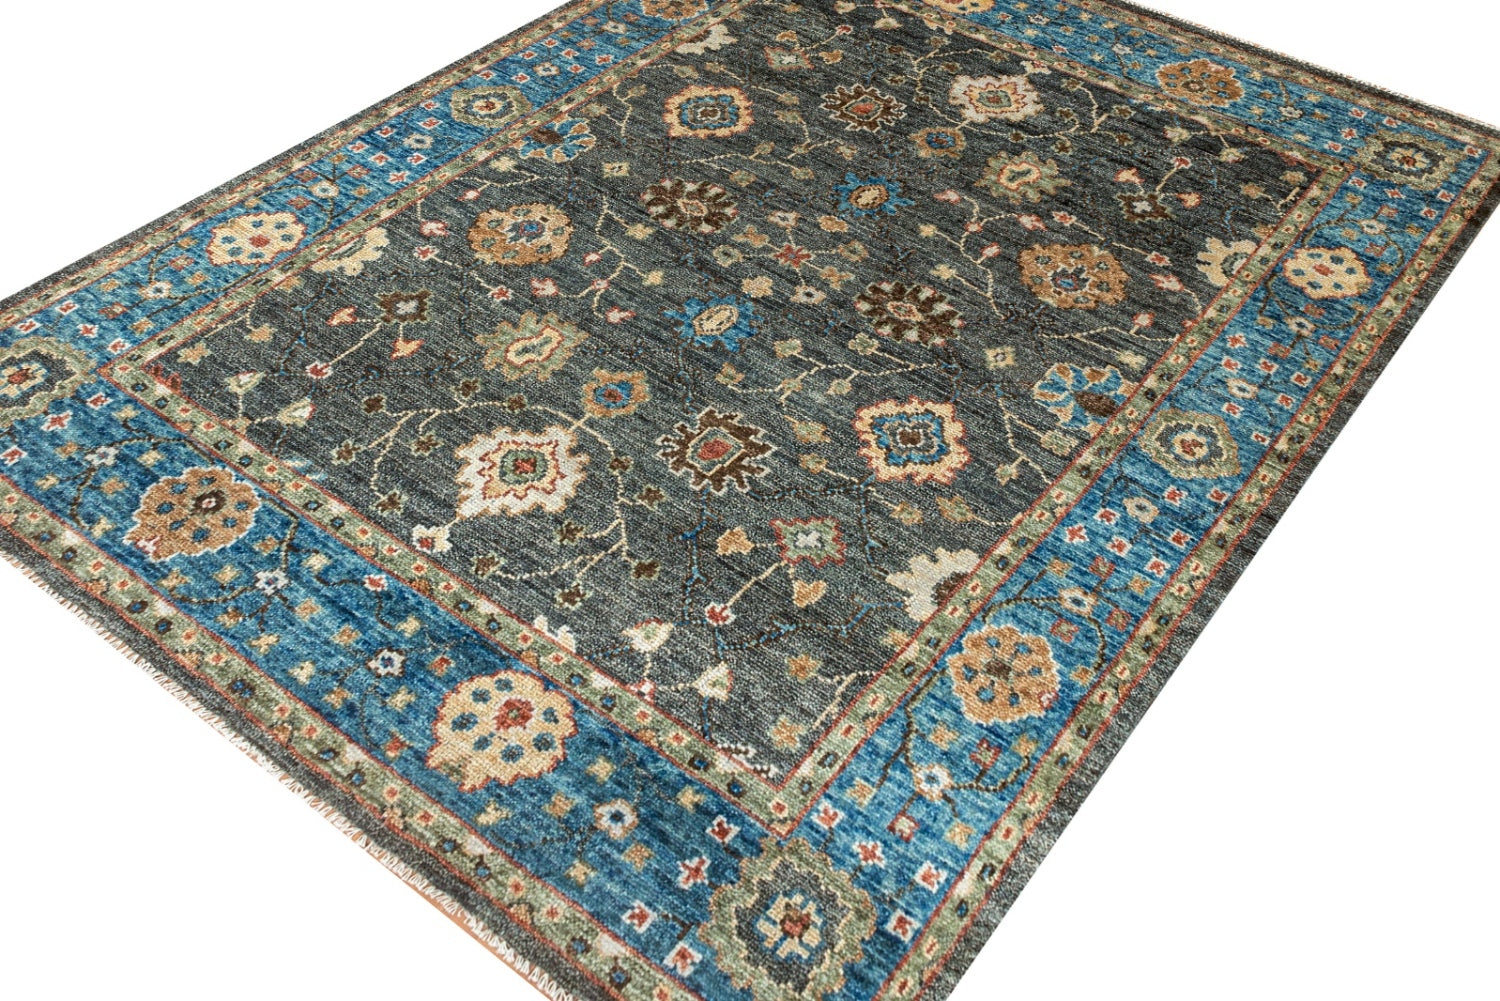 Sultanabad 3 Handwoven Traditional Rug, J71637